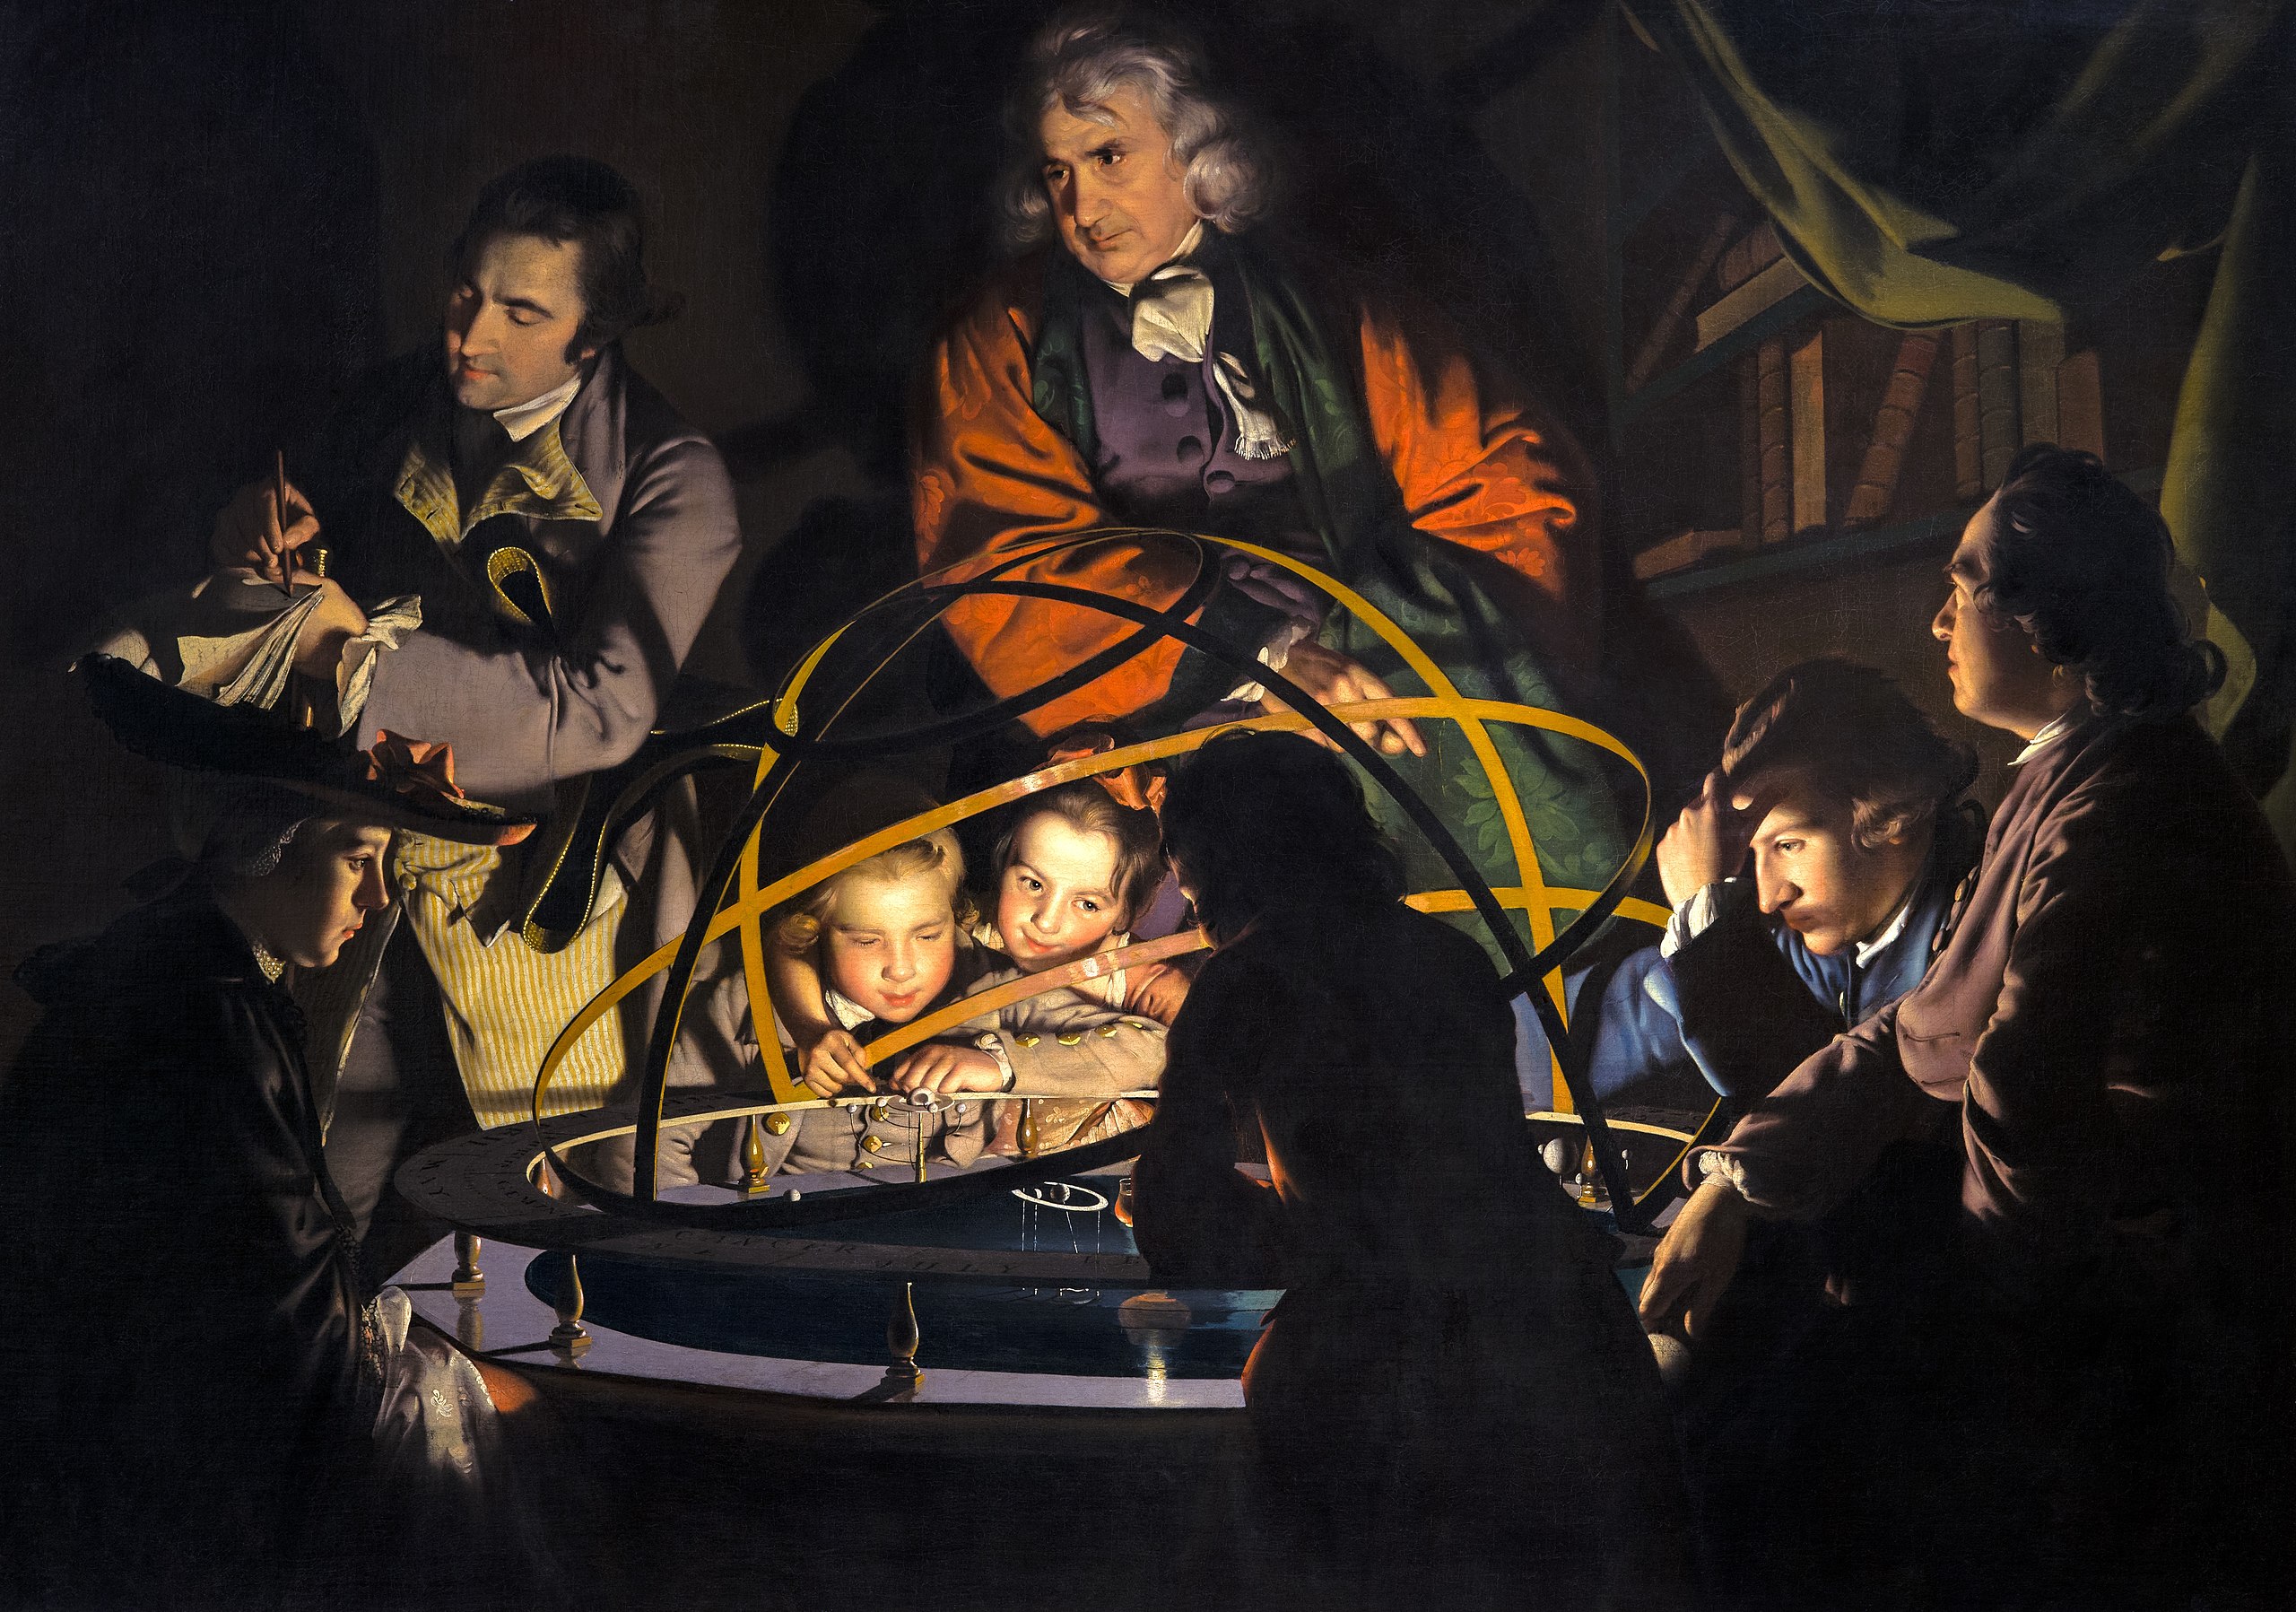 Joseph Wright of Derby, A Philosopher Giving a Lecture at the Orrery, c. 1766, oil on canvas, 147.2 x 203.2 cm (Derby Museums and Art Gallery, England)